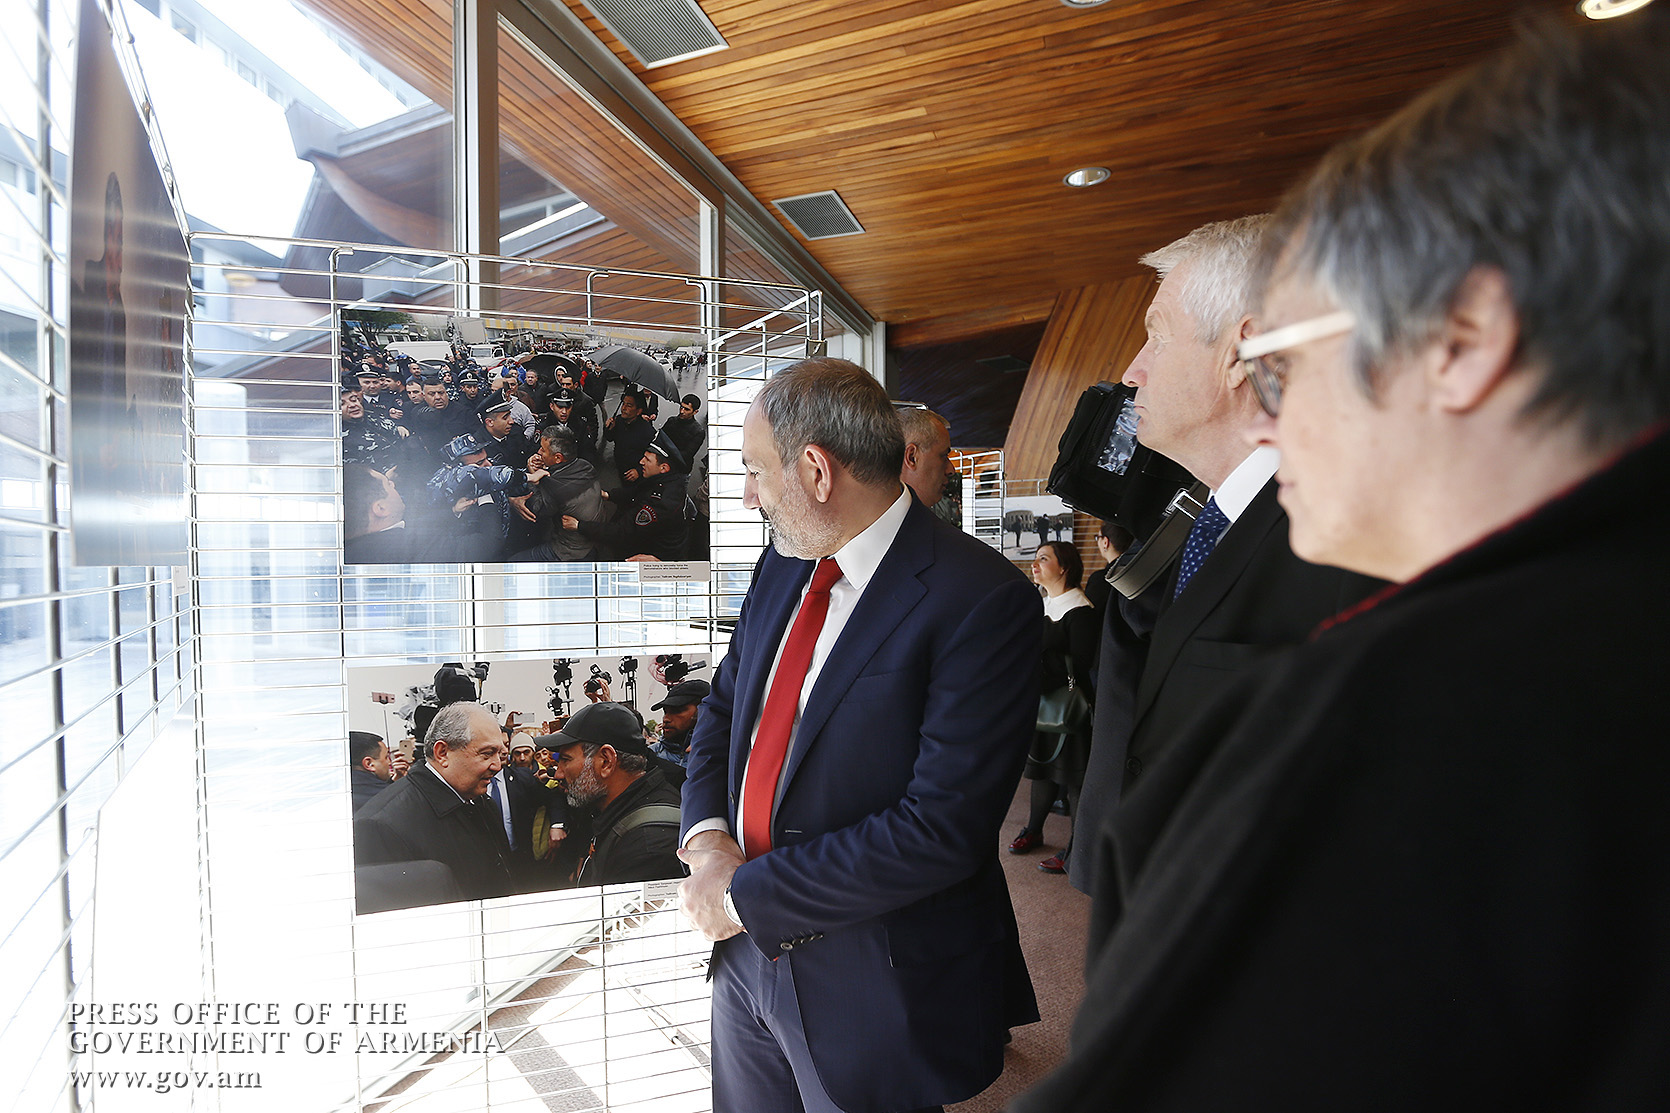 Nikol Pashinyan attends inauguration of The Velvet Revolution of Armenia photographic exhibition at Palais de l’Europe: video